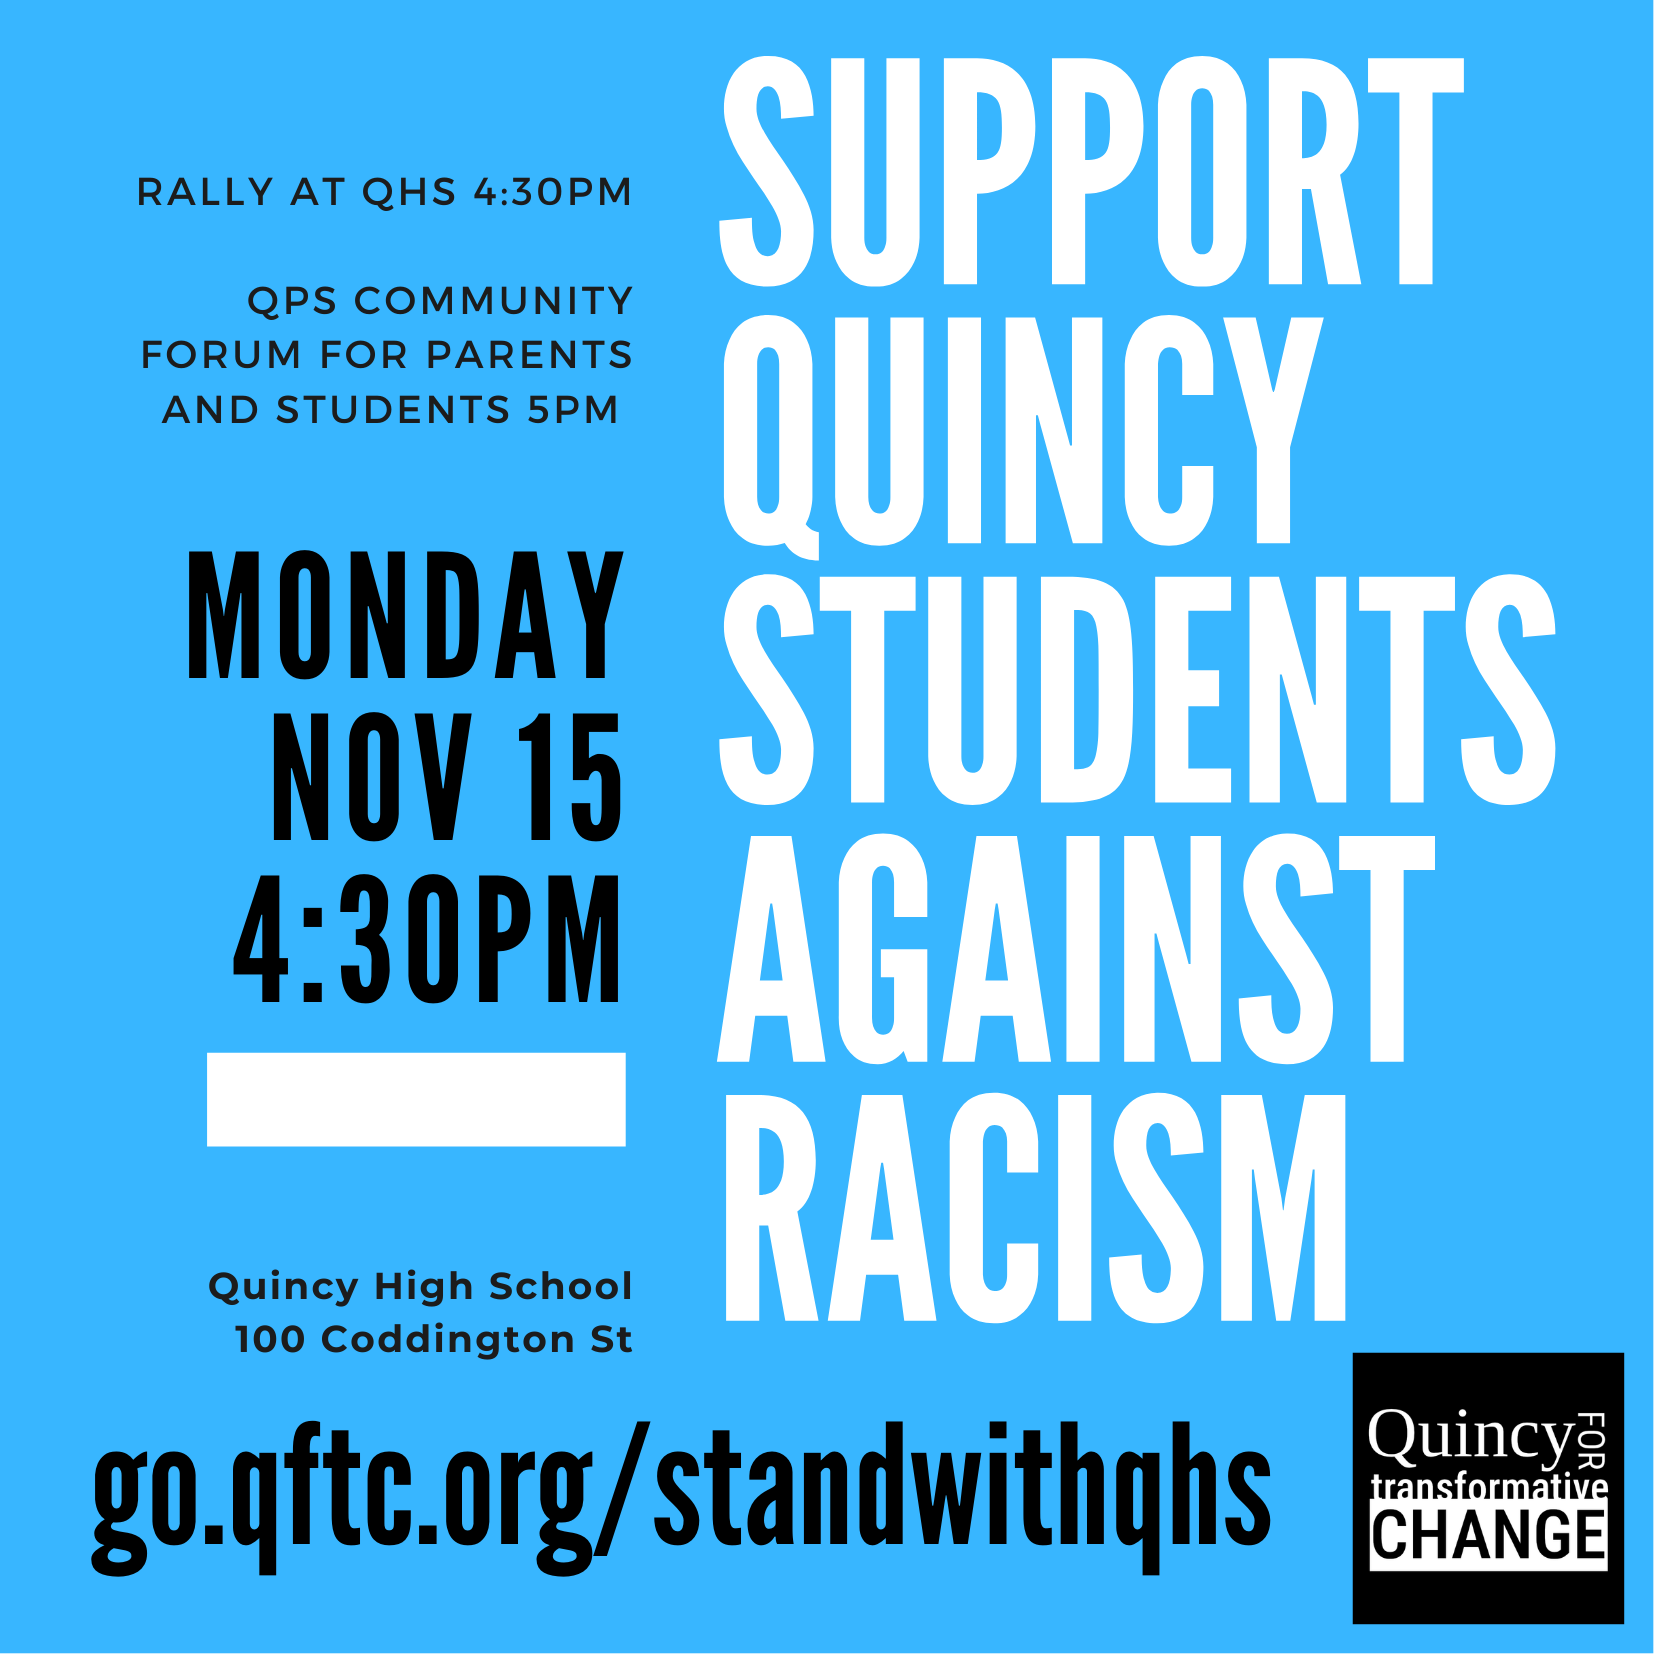 Support Quincy Students Against Racism - Rally at QHS Monday Nov 15 4:30PM